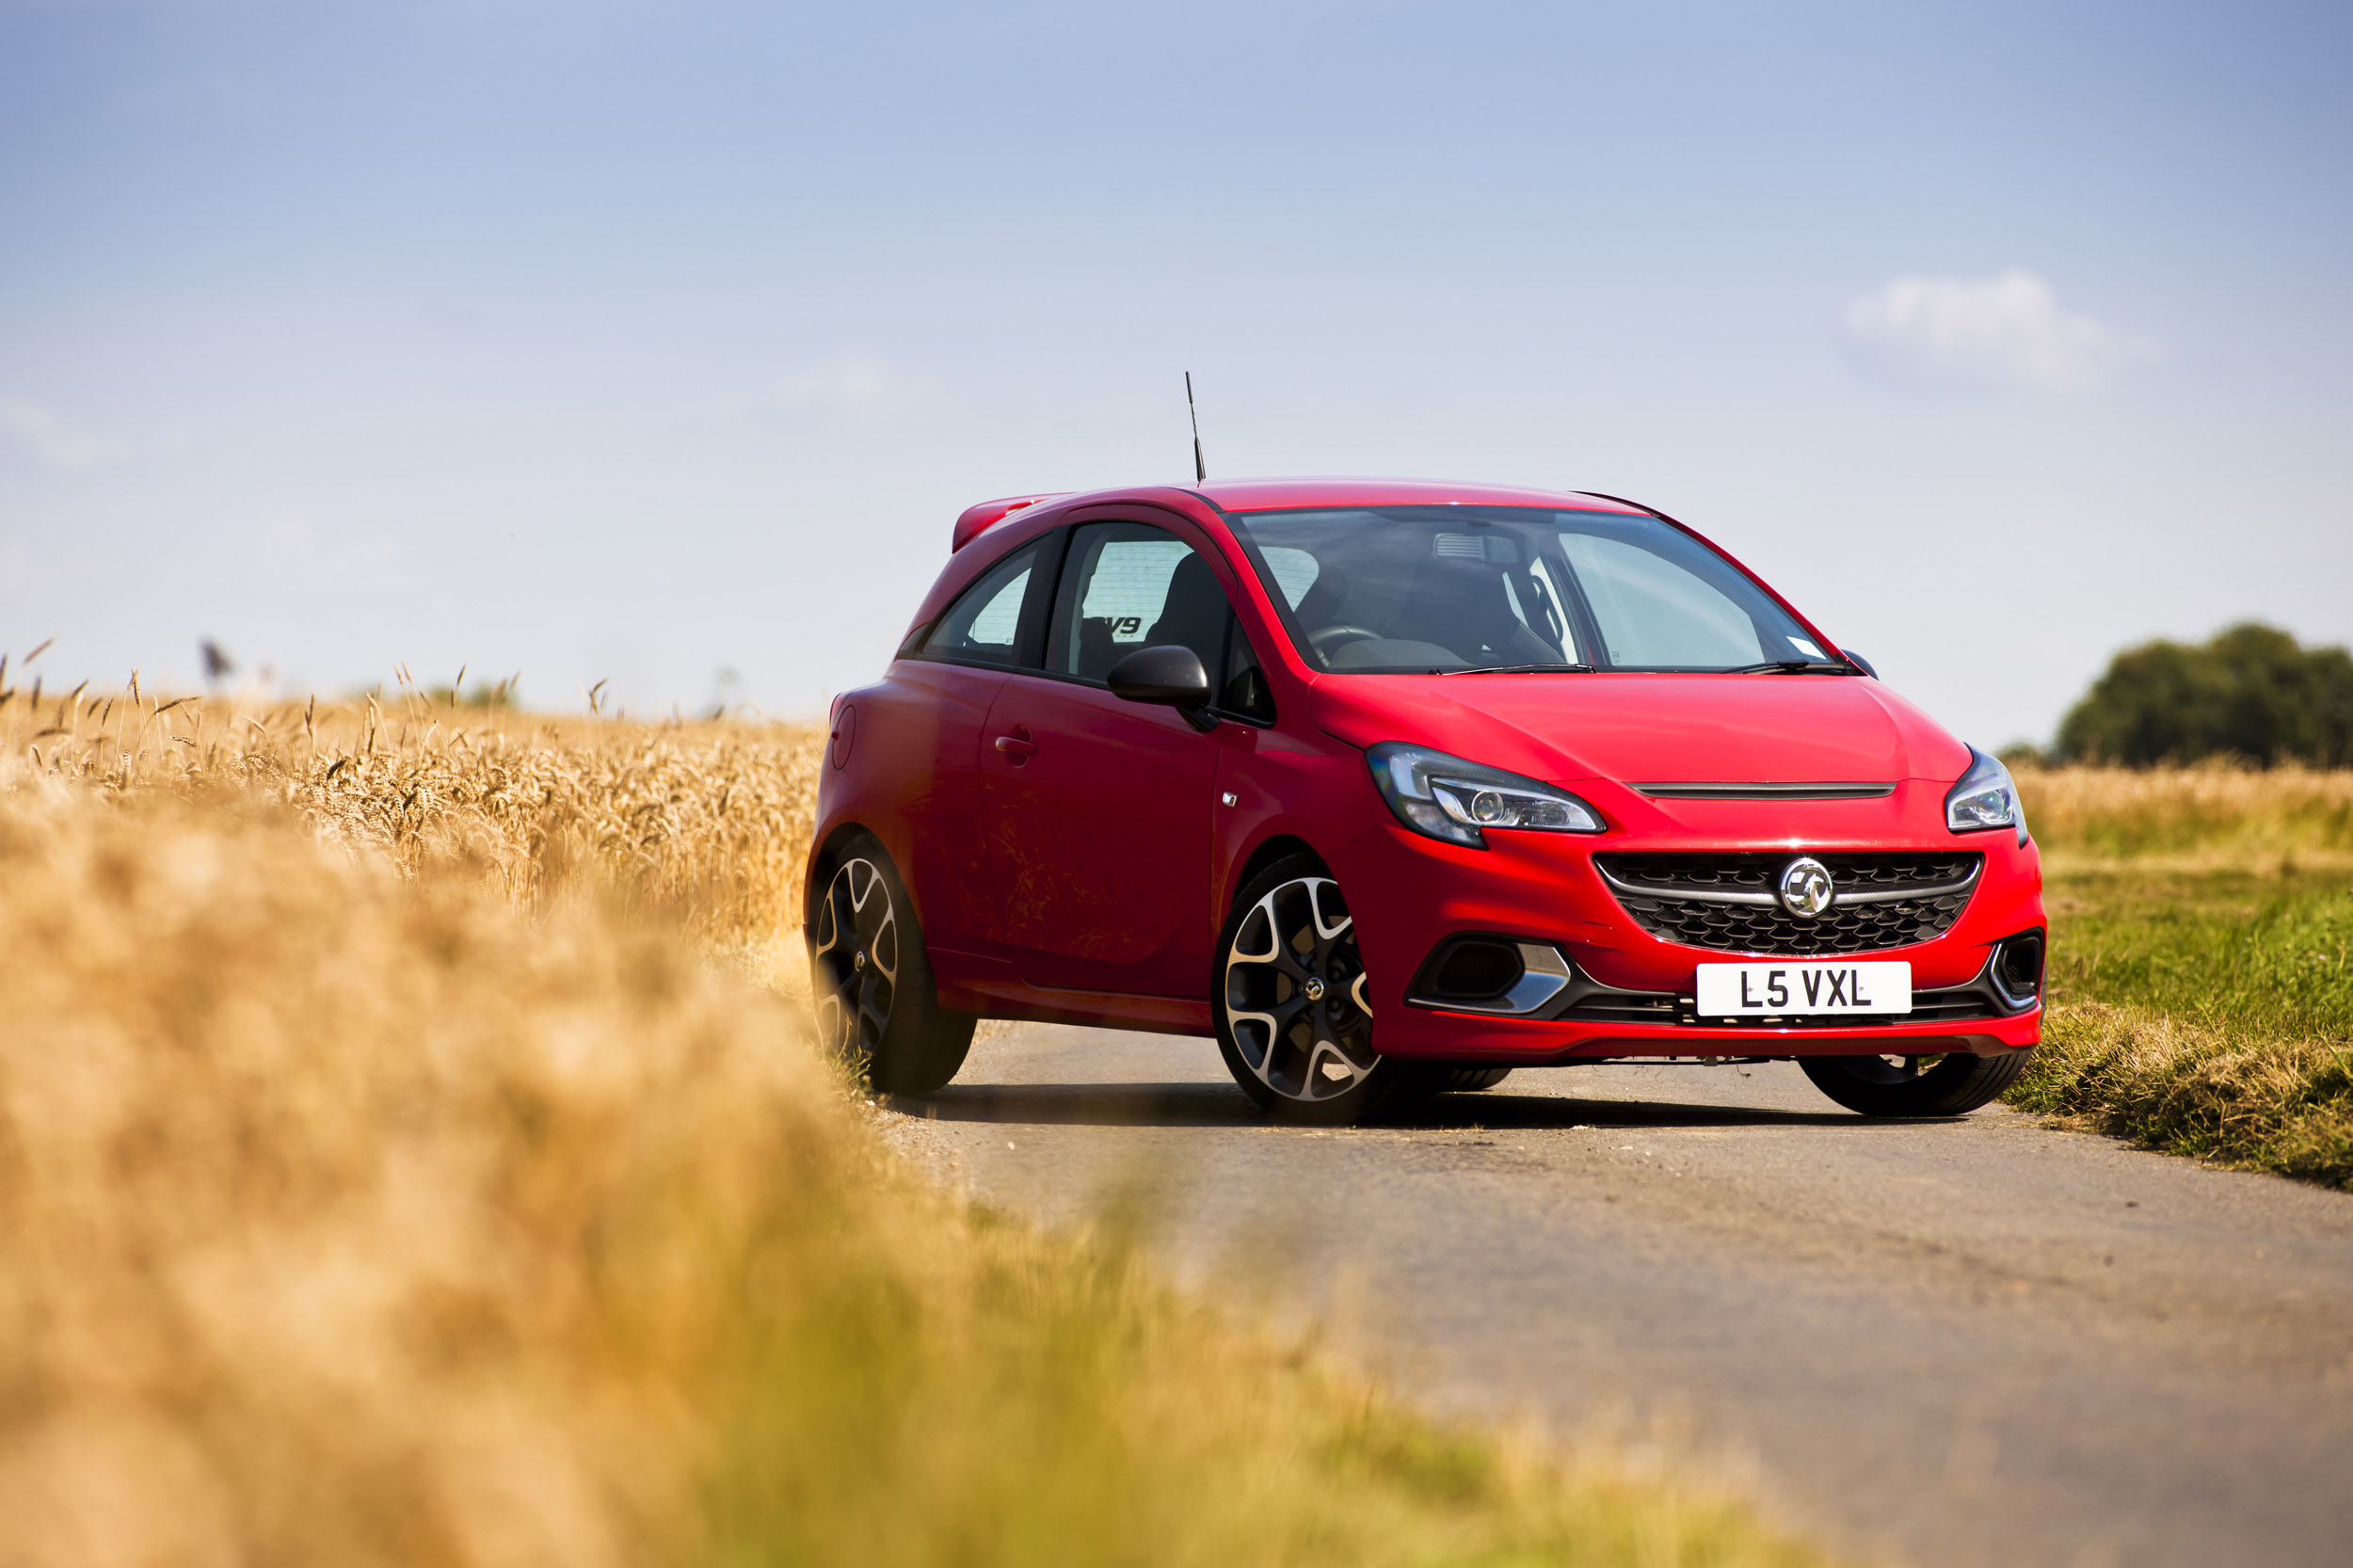 Review: Opel Corsa D ( 2006 - 2014 ) - Almost Cars Reviews